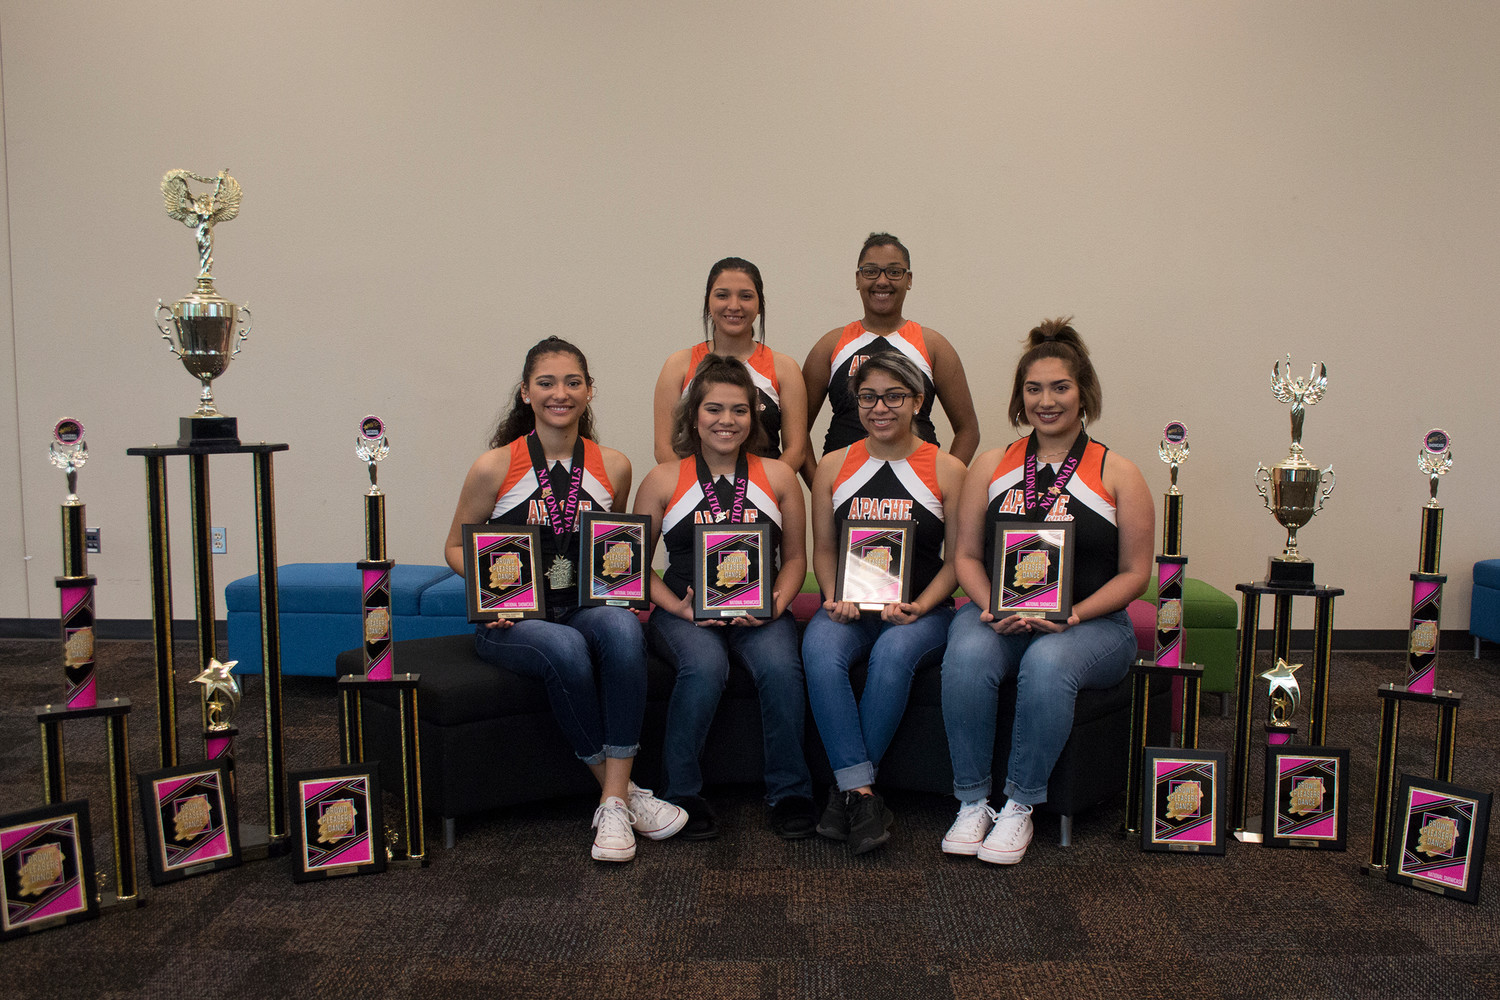 Officer Line: 1st Row L to R: Julienne Morales, Isabel Vela, Wendy Lopez
2nd Row L to R: Kayla Estrada and Trinity James